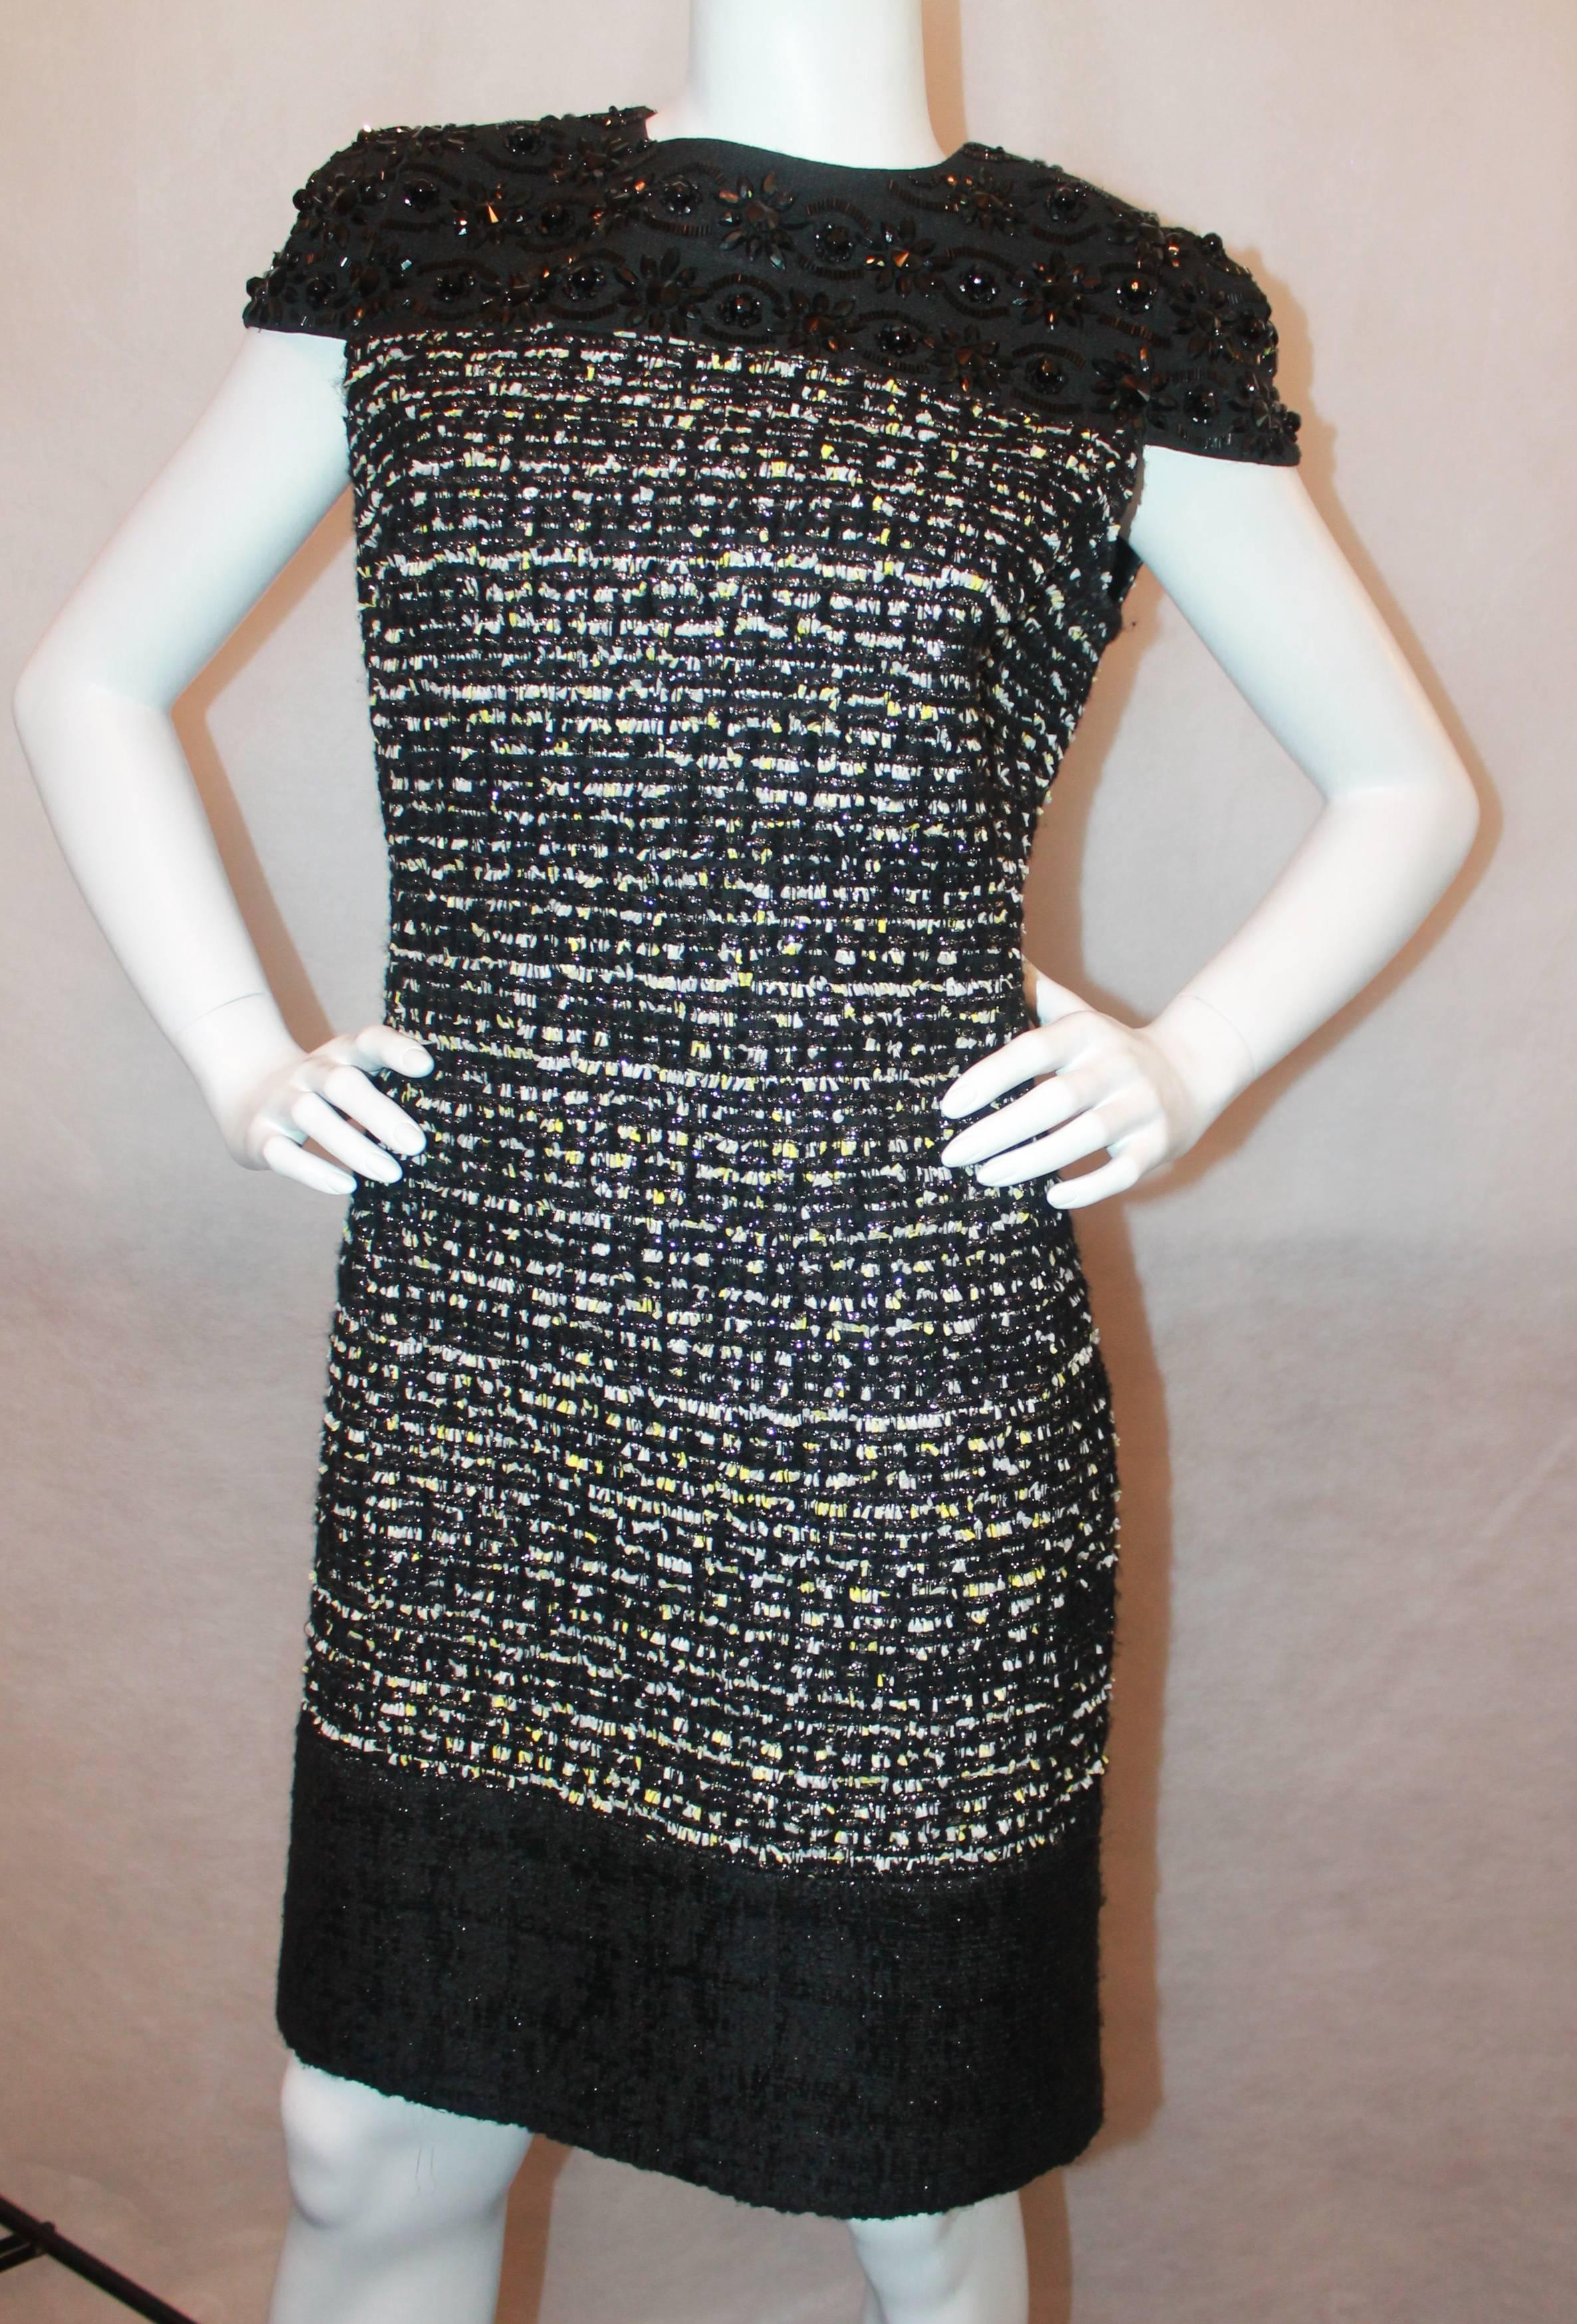 Giambattista Valli Black Stone and Muli Tweed Dress - 10 Top portion of dress is a black silk with cap sleeve and heavy stone work throughout. The main portion of the dress is a black, white, yellow and silver metallic tweed, with a bottom black